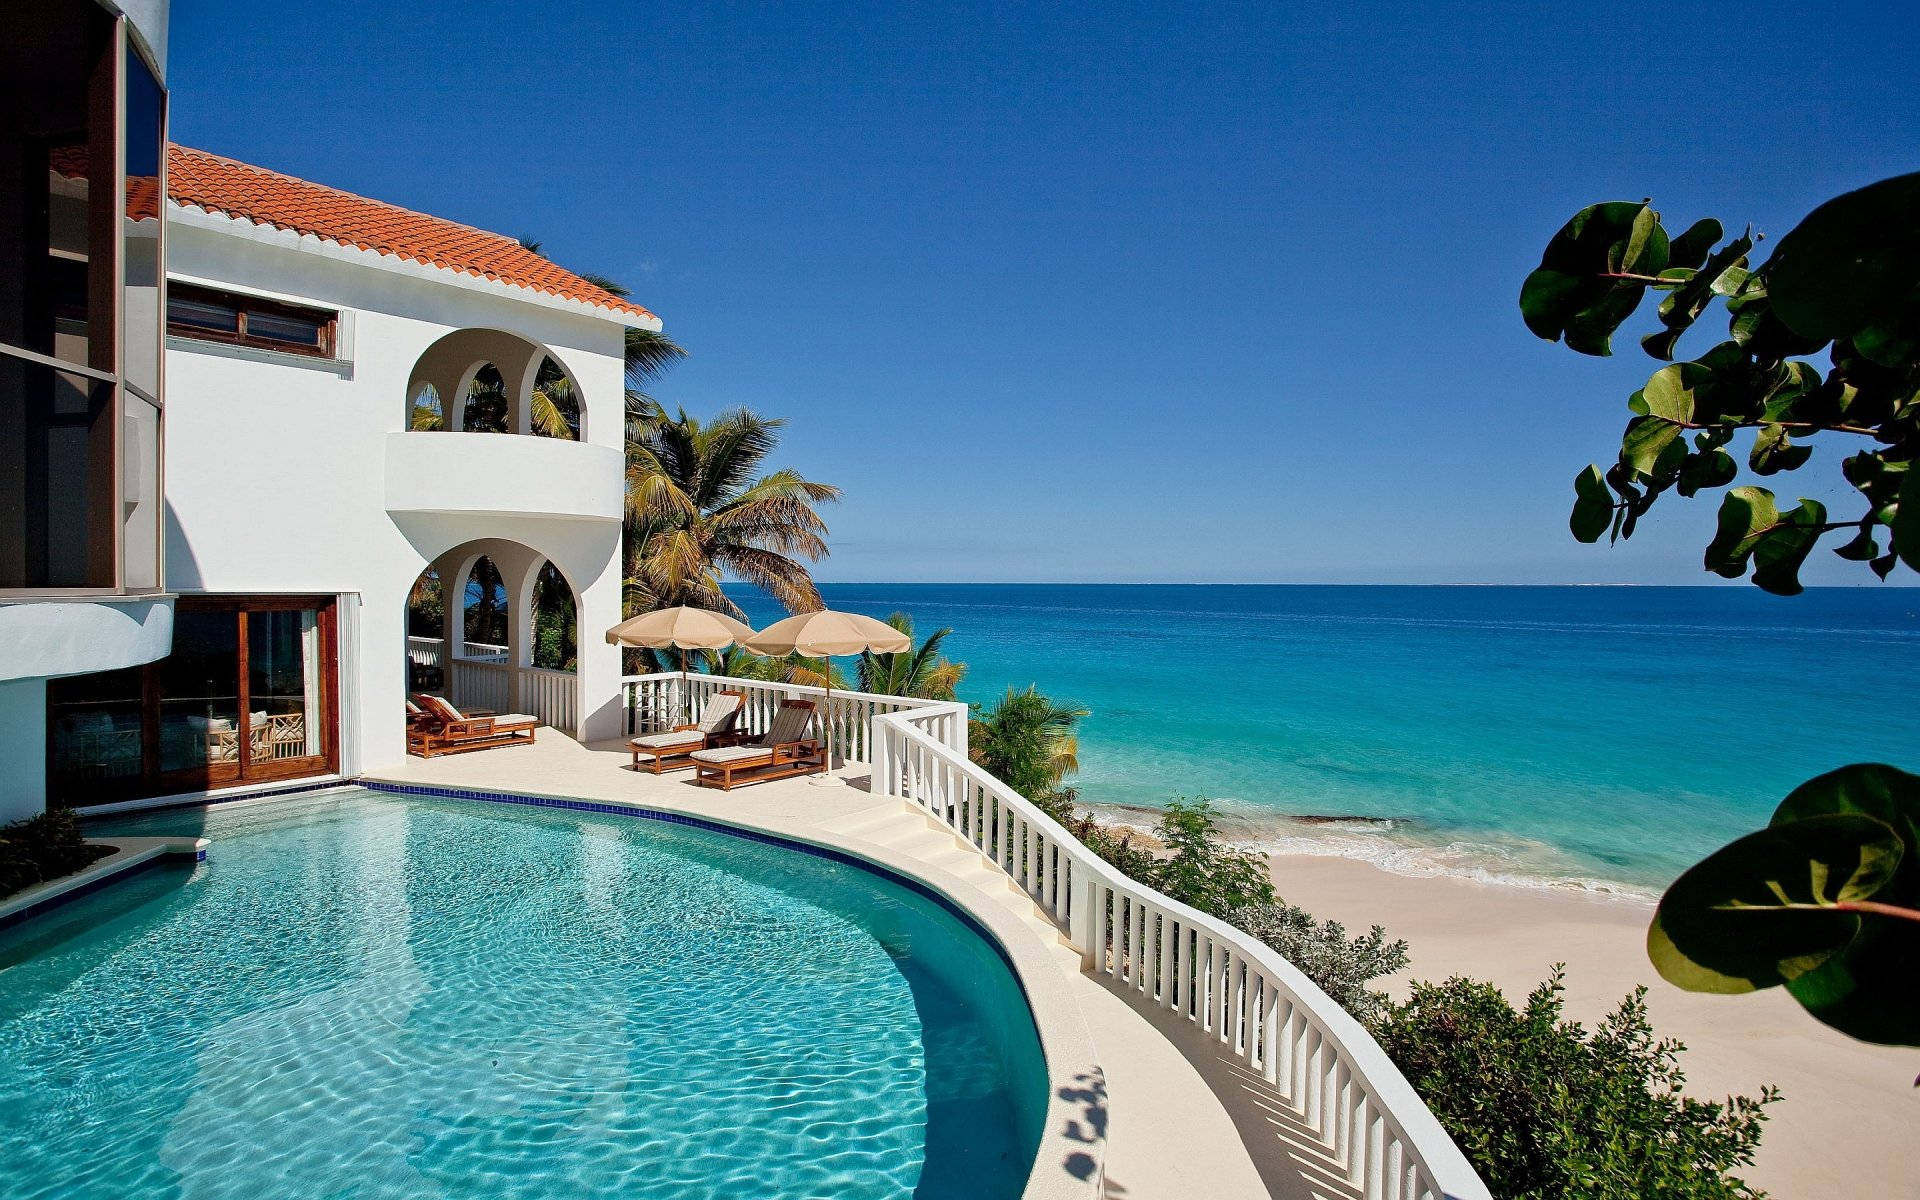 Tranquil Beach House In Anguilla, Caribbean